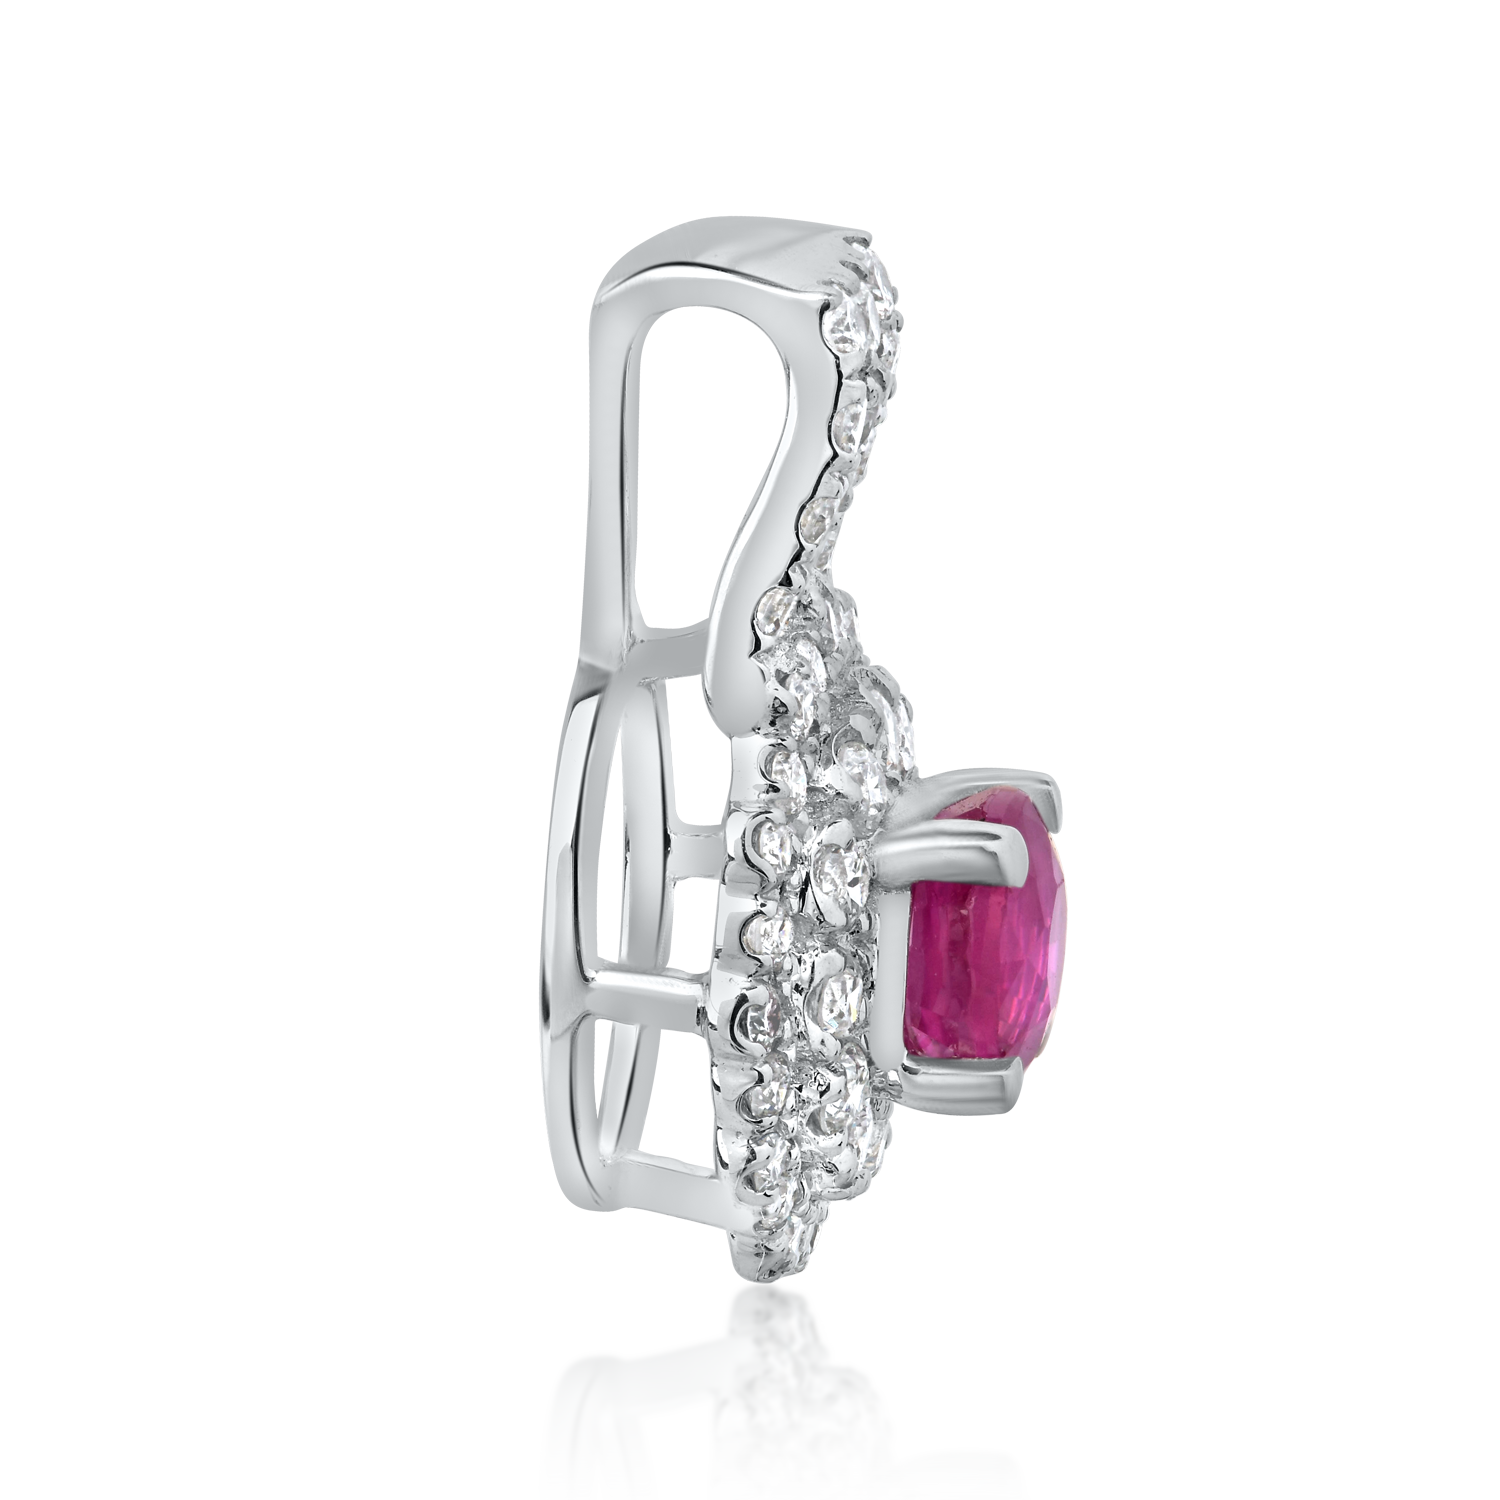 18K white gold pendant with 0.33ct ruby and 0.24ct diamonds